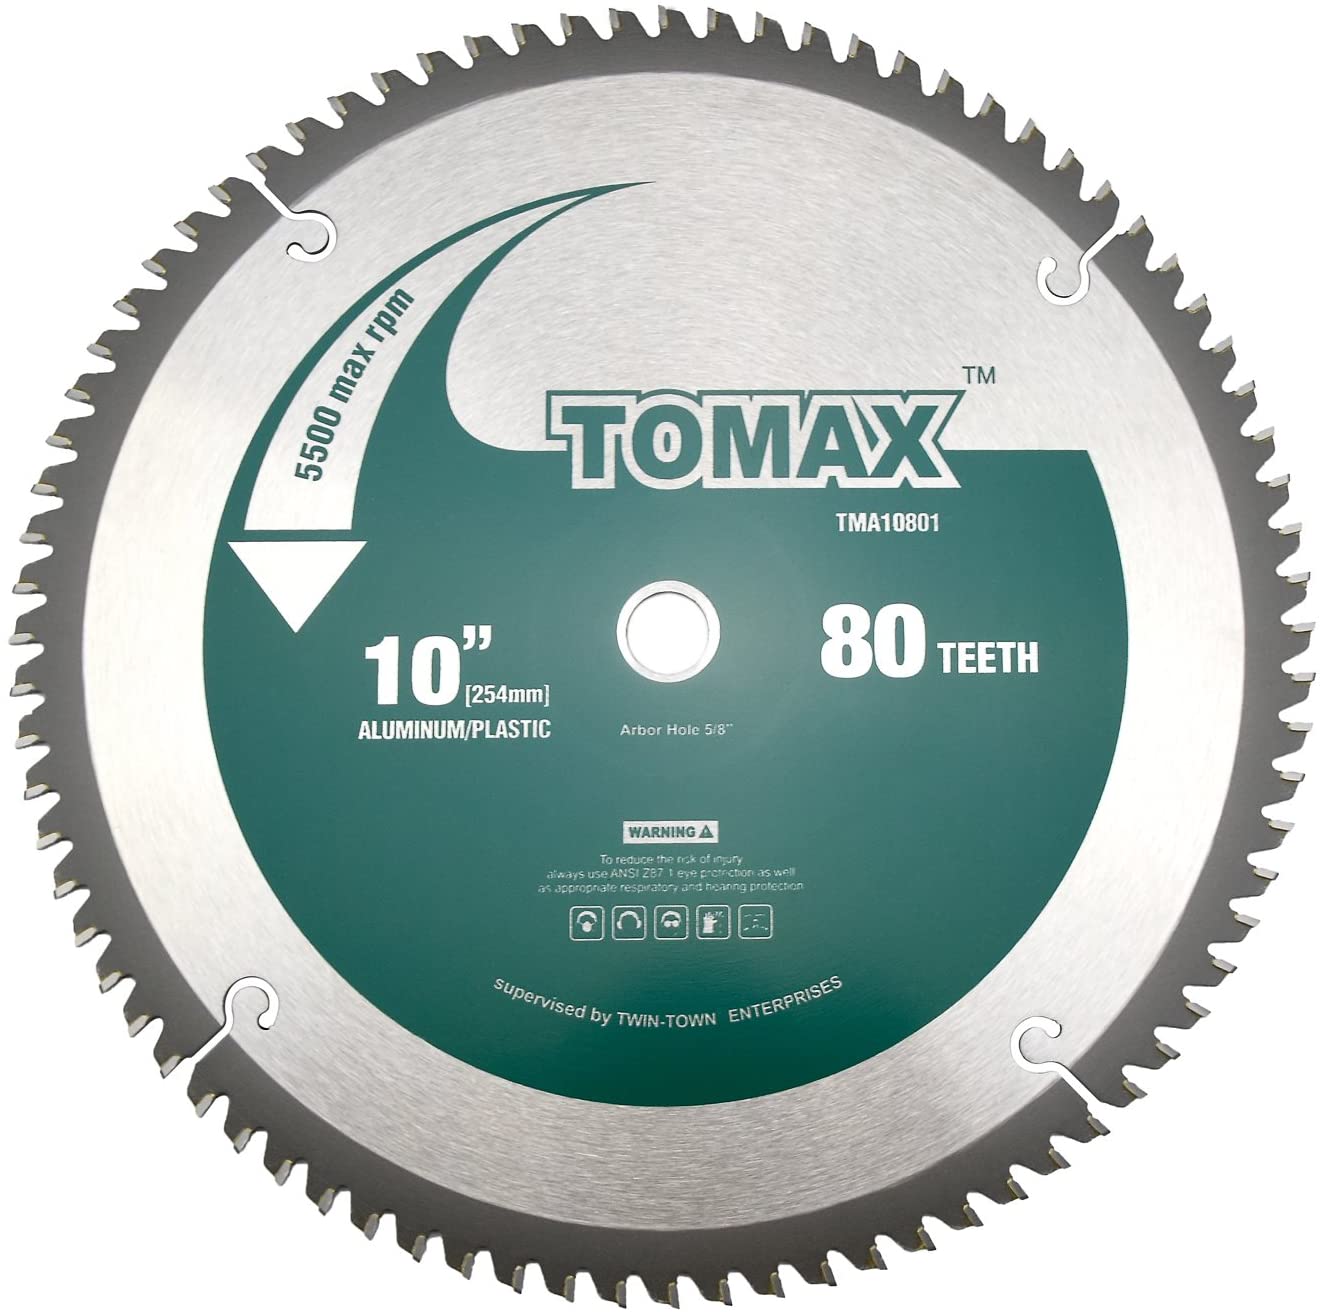 TOMAX, TOMAX 10-Inch 80 Tooth TCG Aluminum and Non-Ferrous Metal Saw Blade with 5/8-Inch Arbor